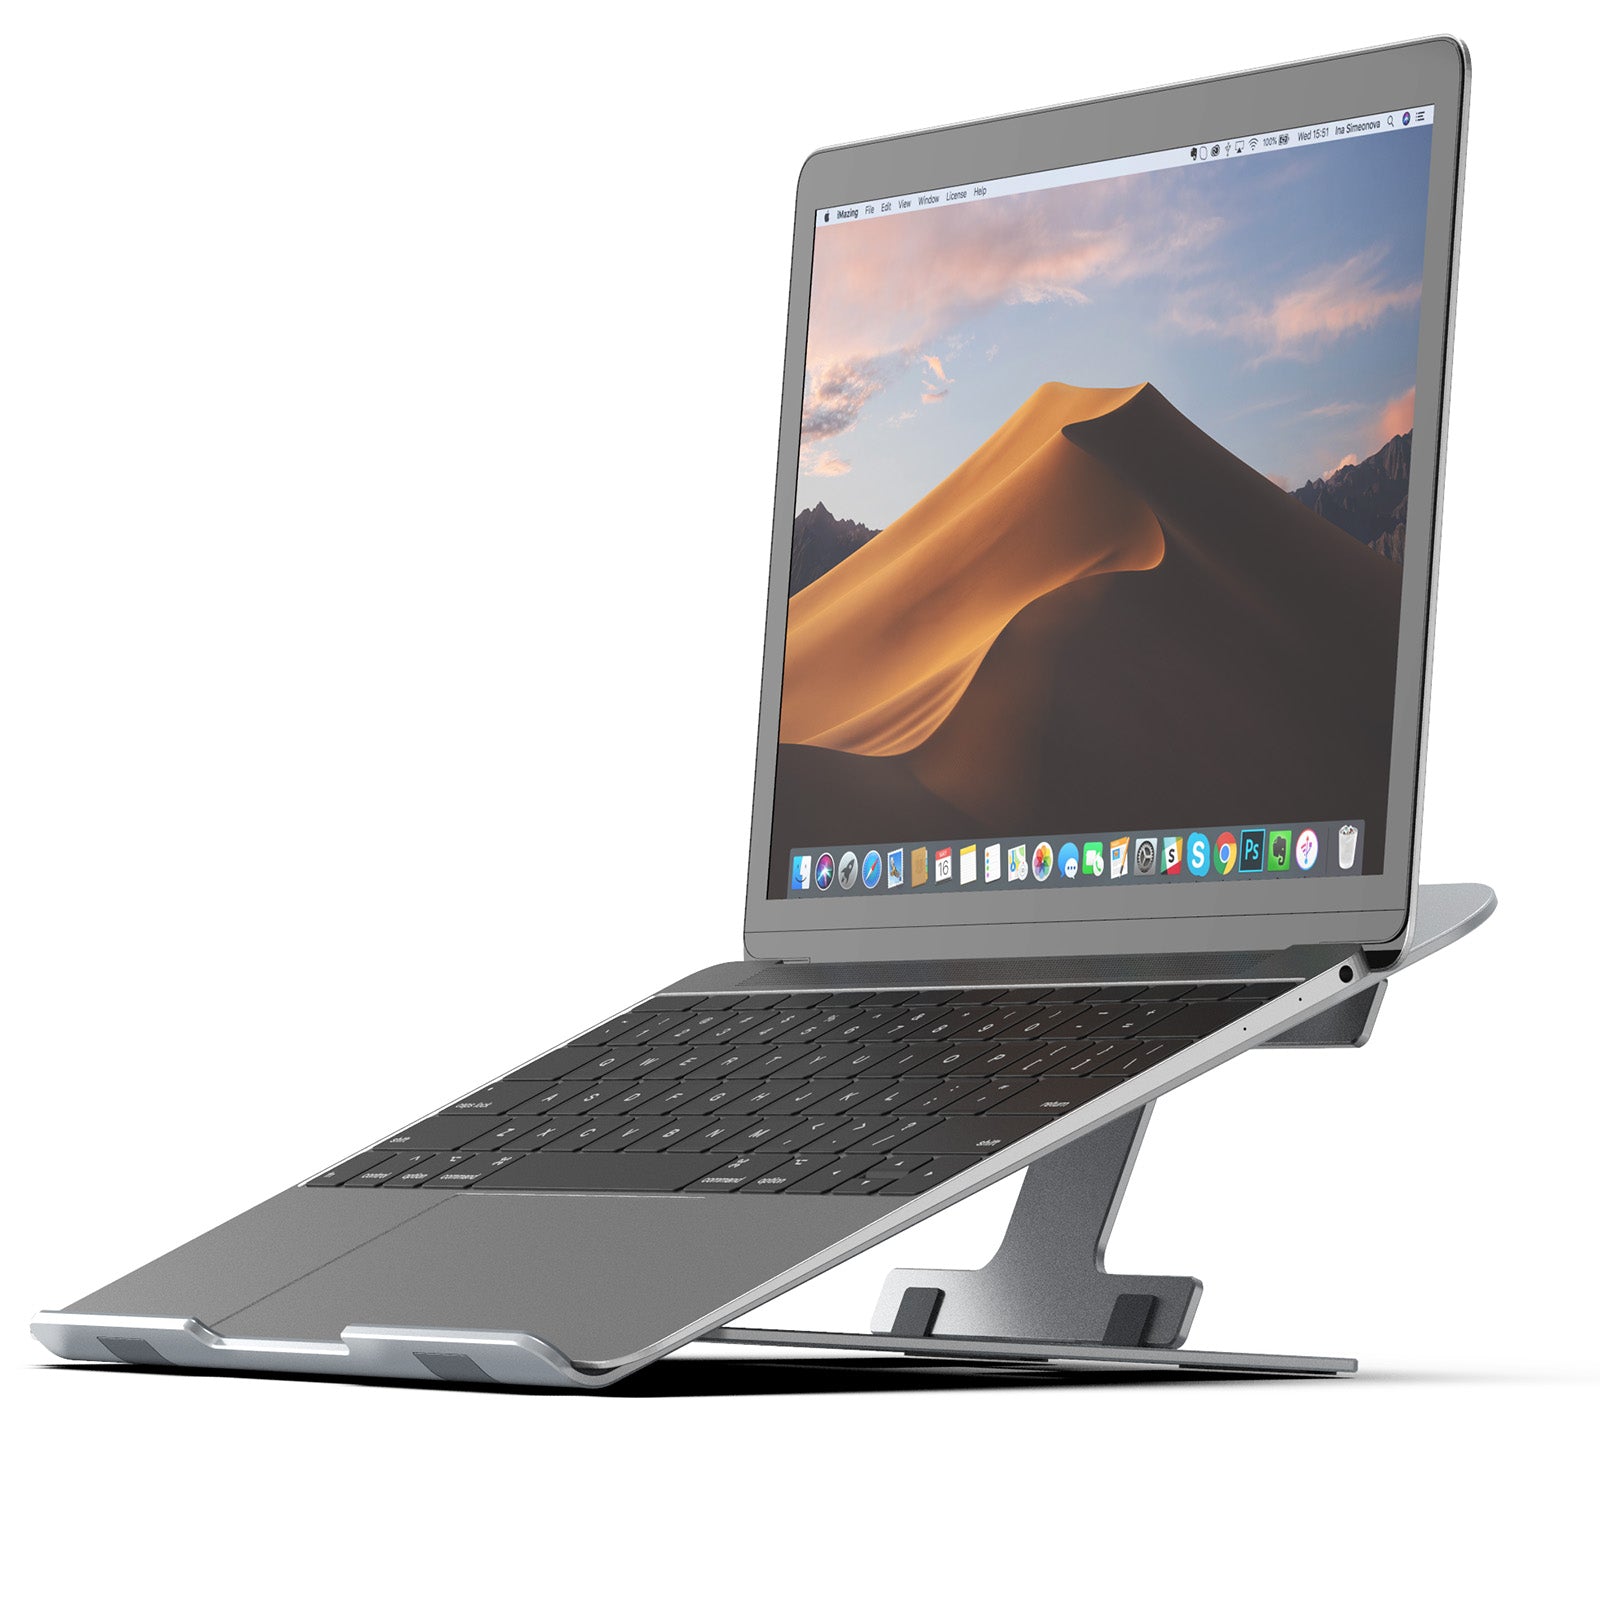 Novoo Adjustable Laptop Stand Aluminum Angle Laptop Stand Silver